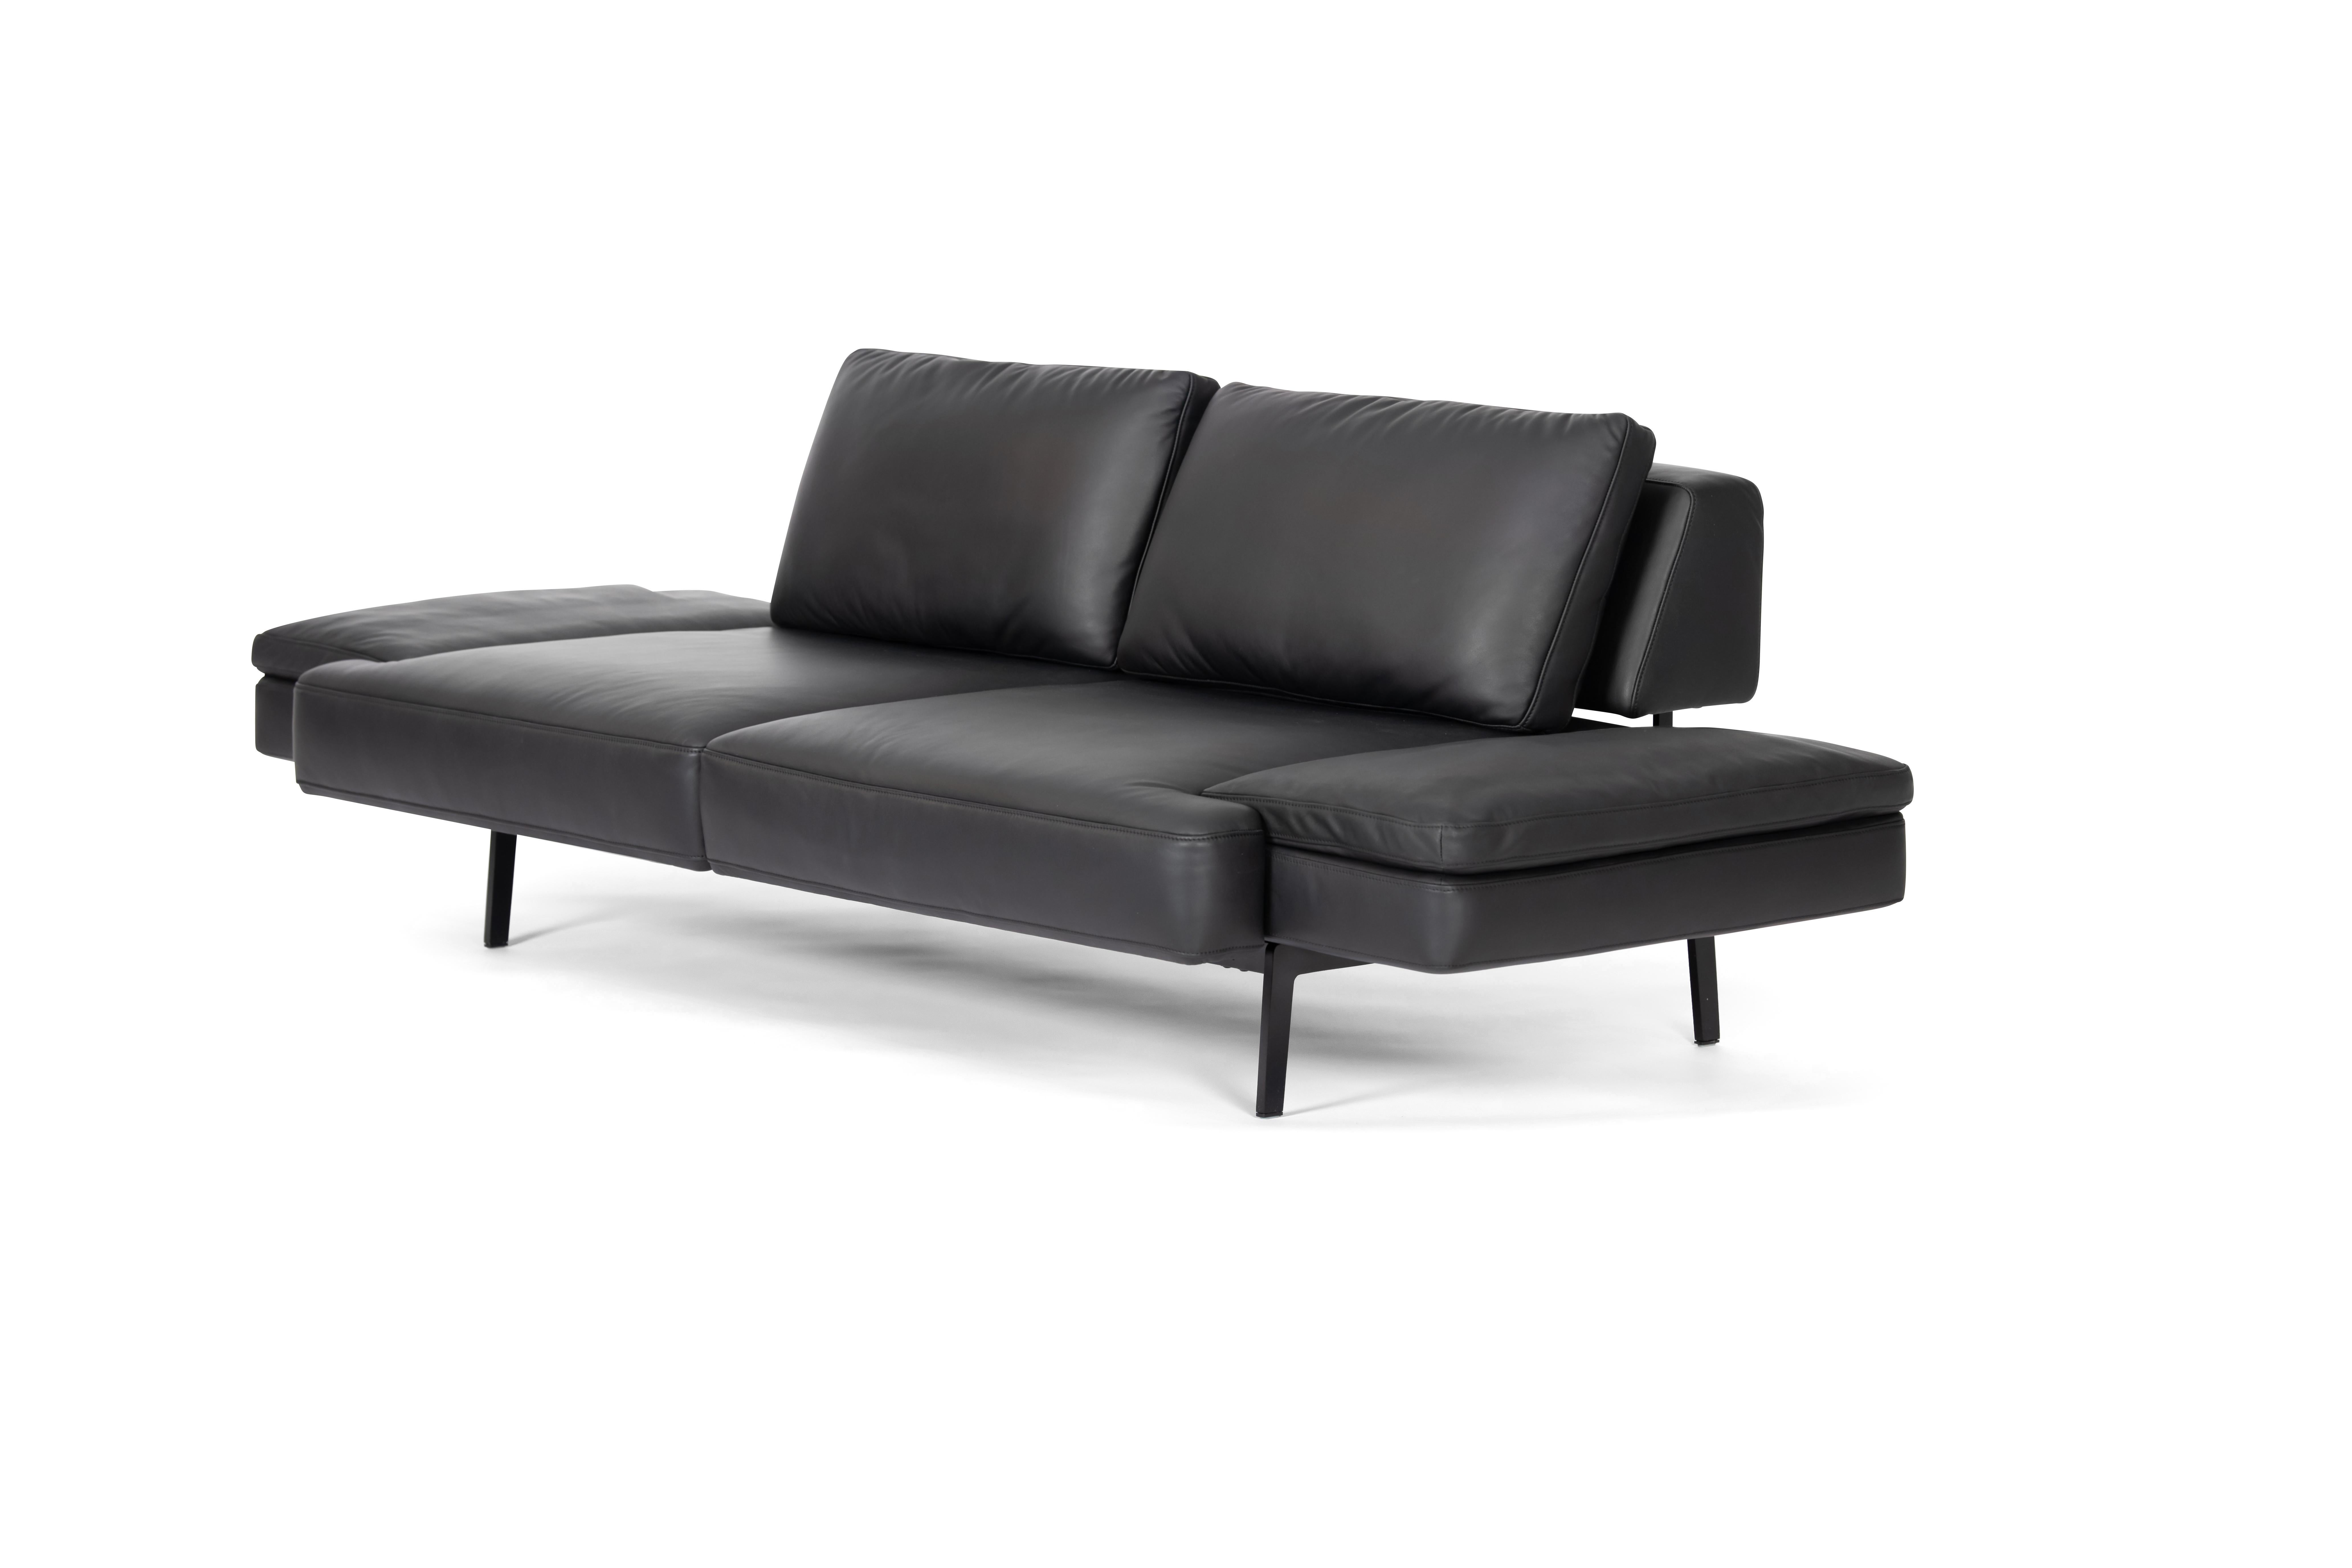 DeSede Ds-747/04 Multifunctional Sofa in Black Leather Seat and Back Upholstery In New Condition For Sale In Brooklyn, NY